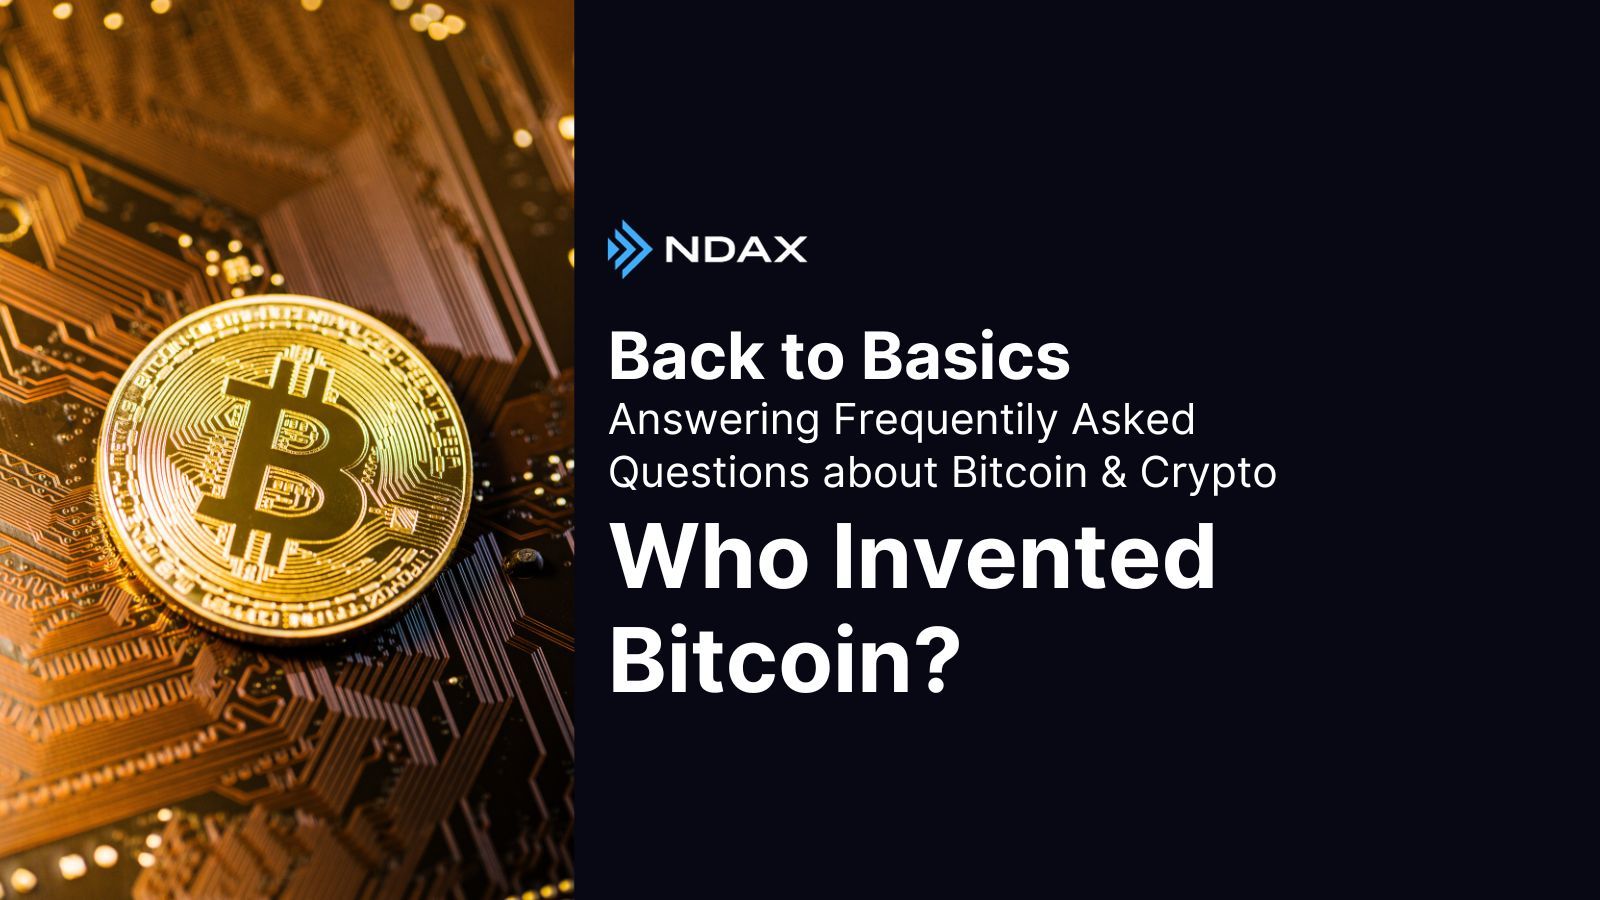 Who Invented Bitcoin?